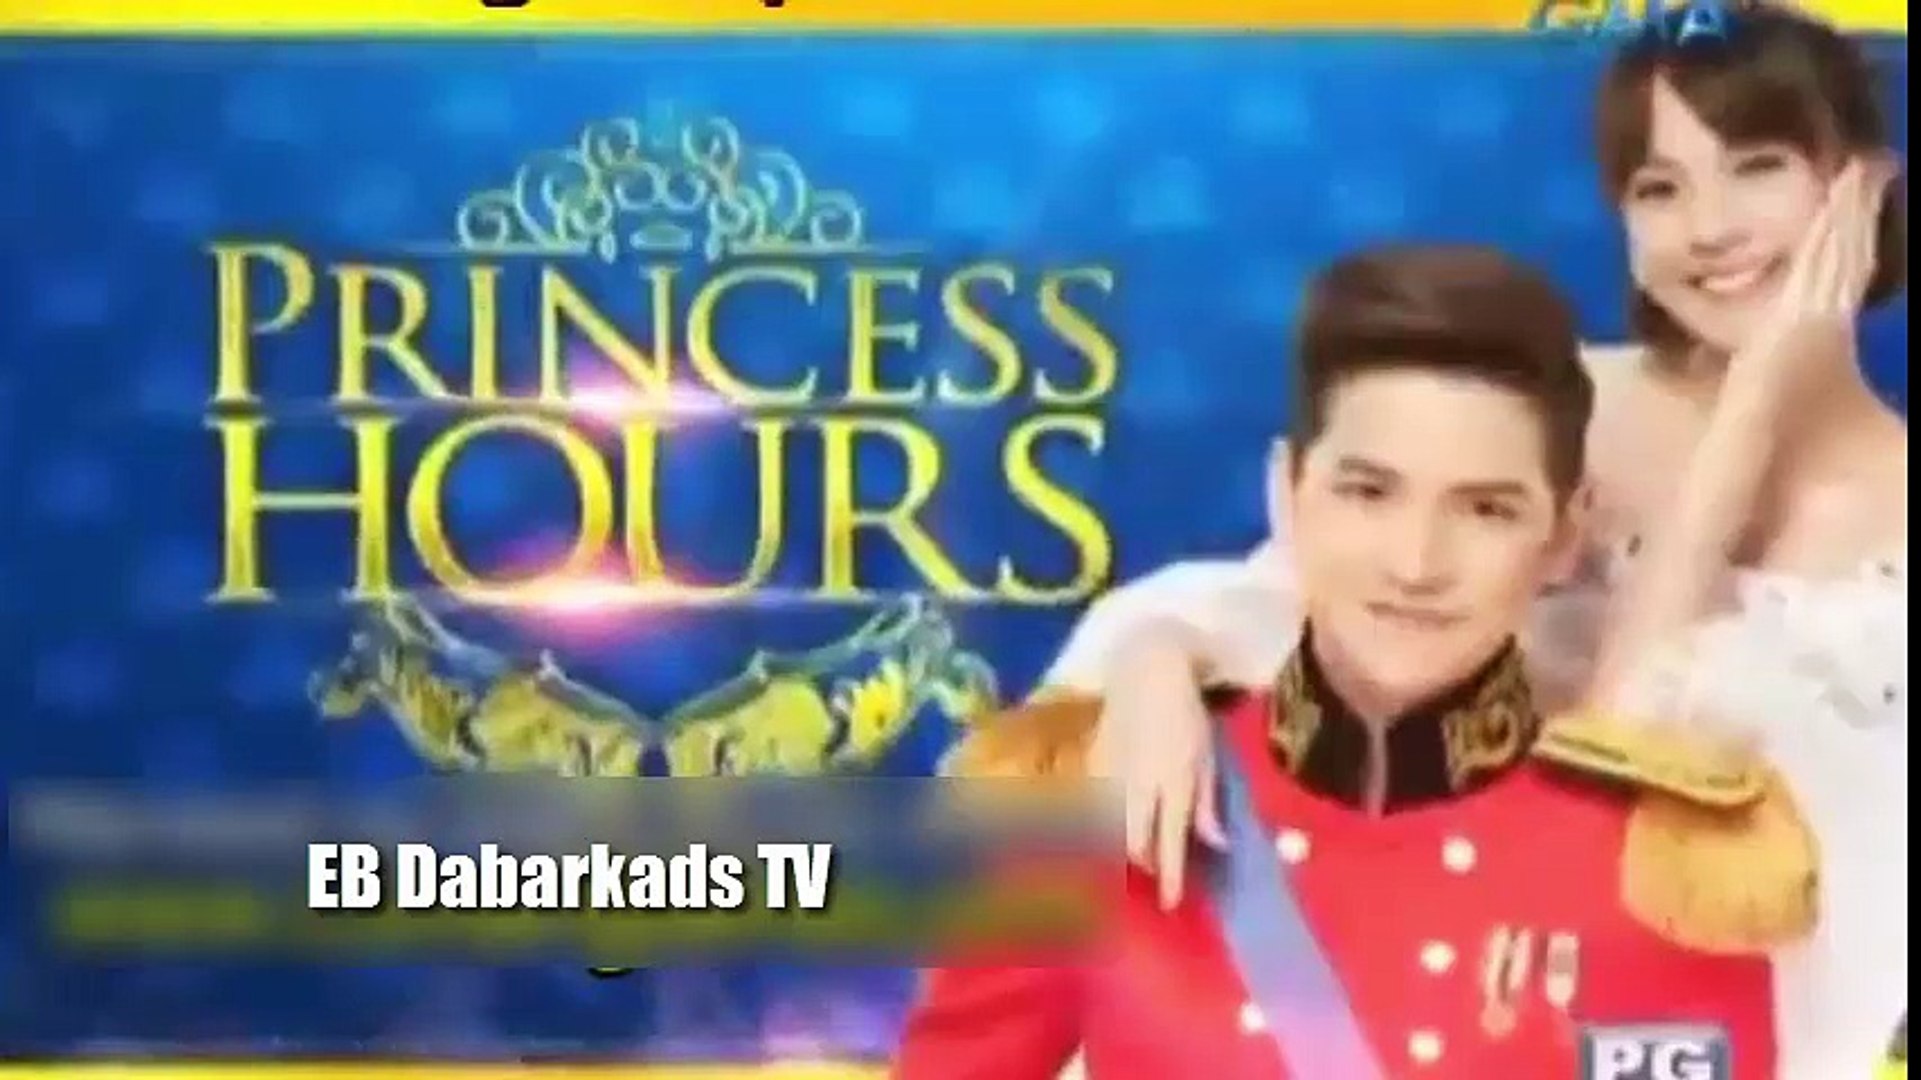 Princess hours August 24, 2018 Wakas - Tagalog Dubbed Part 1